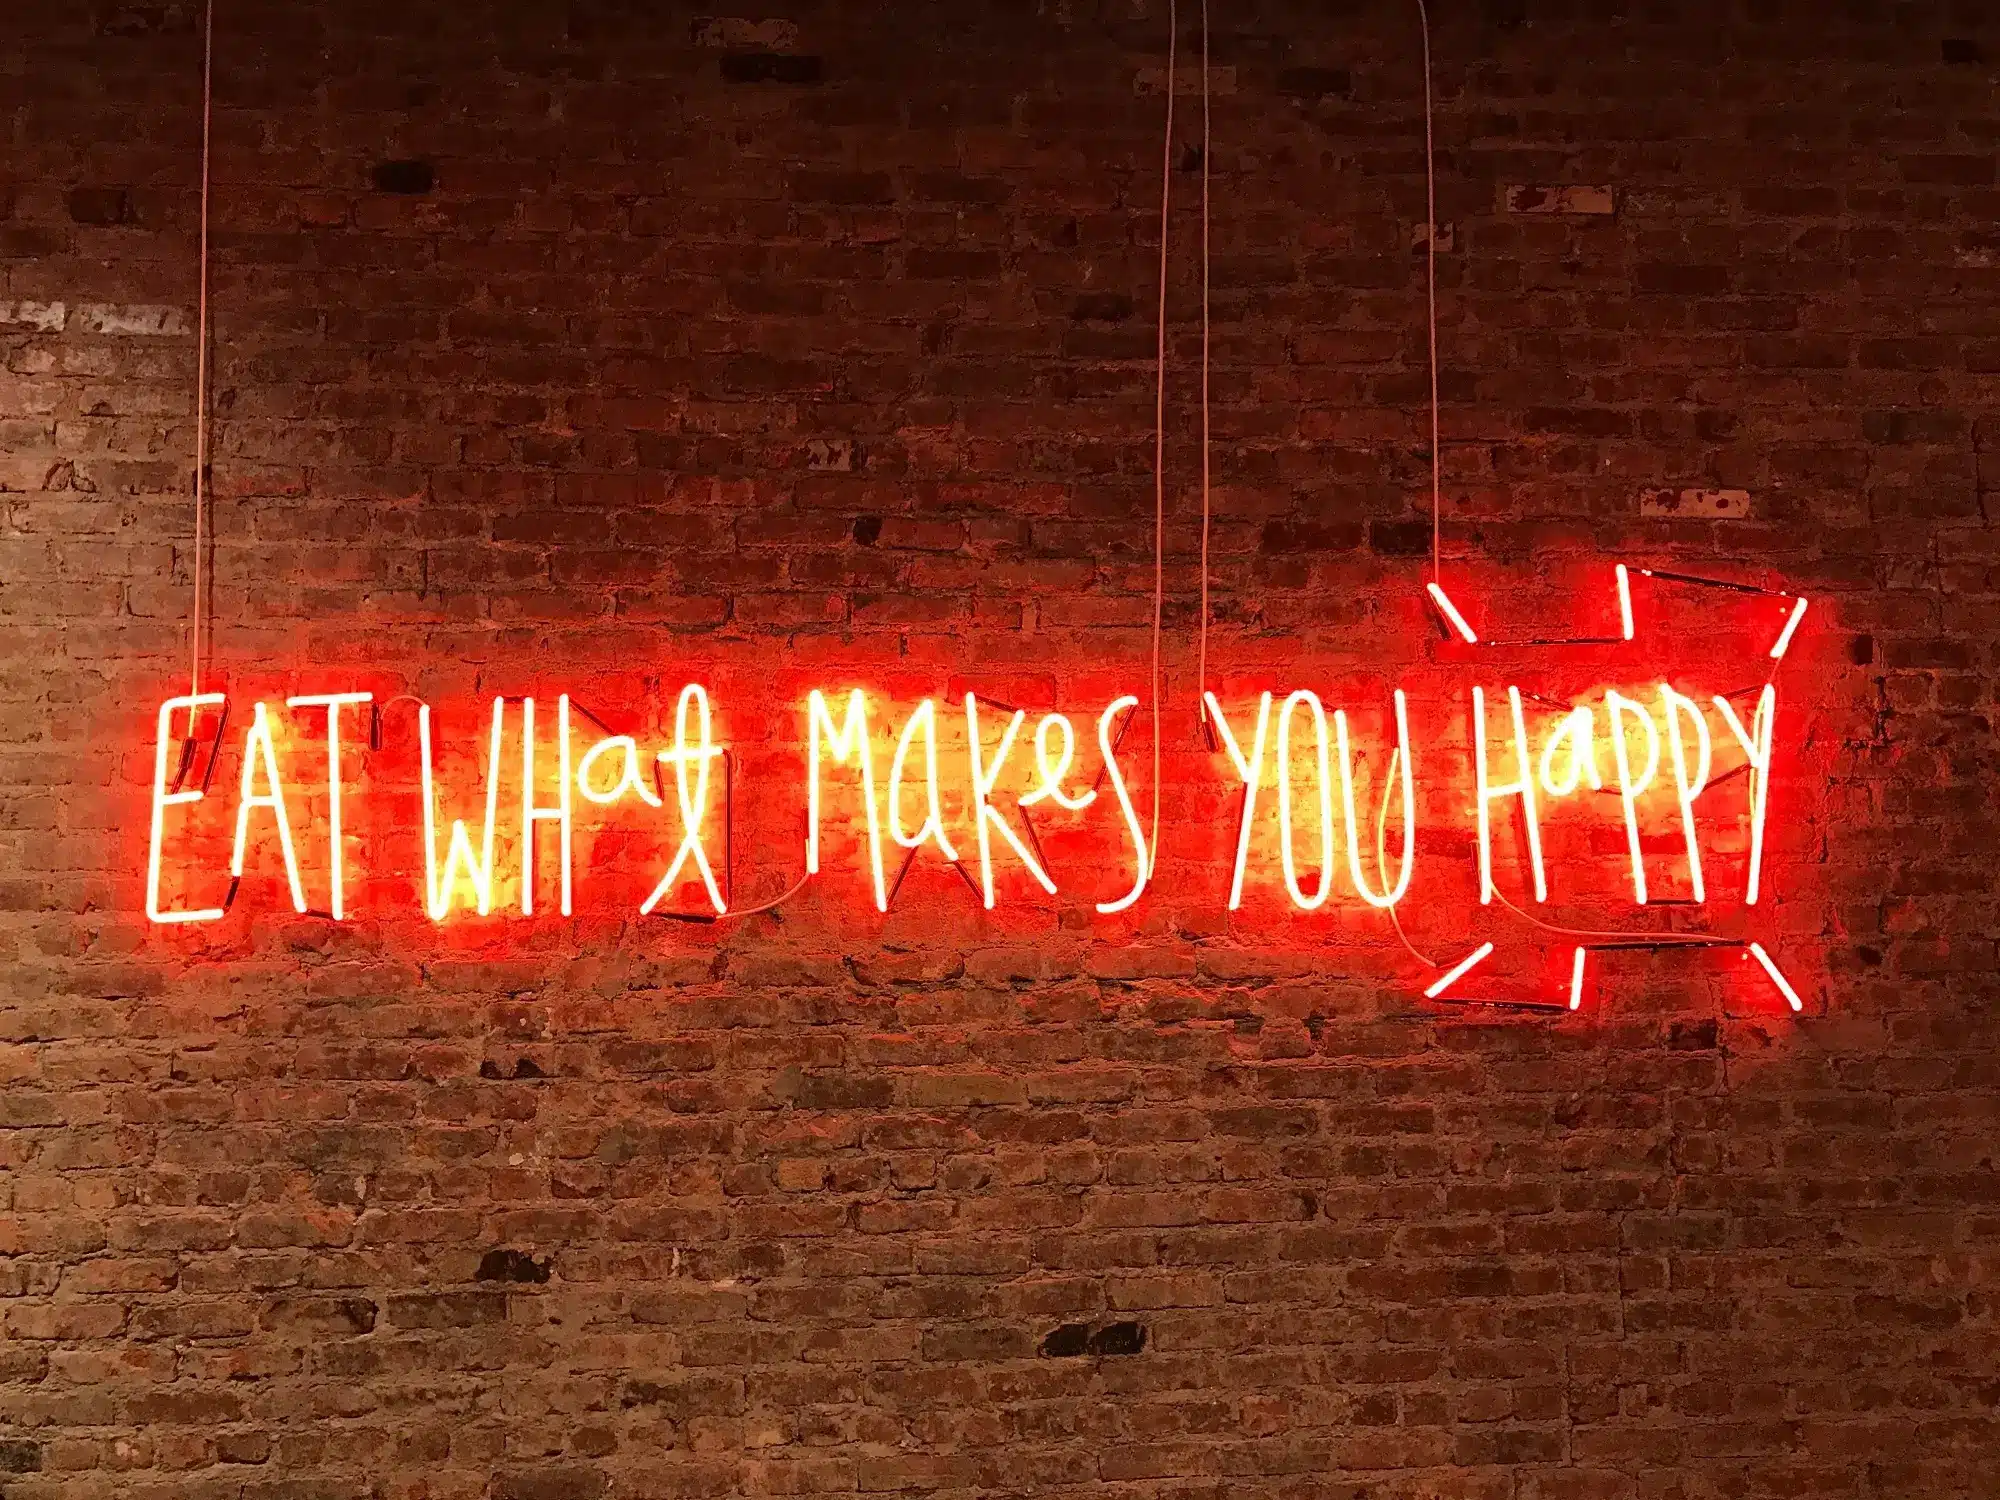 Neon light signage that says 'Eat what makes you happy,' representing the concept of GST on food.